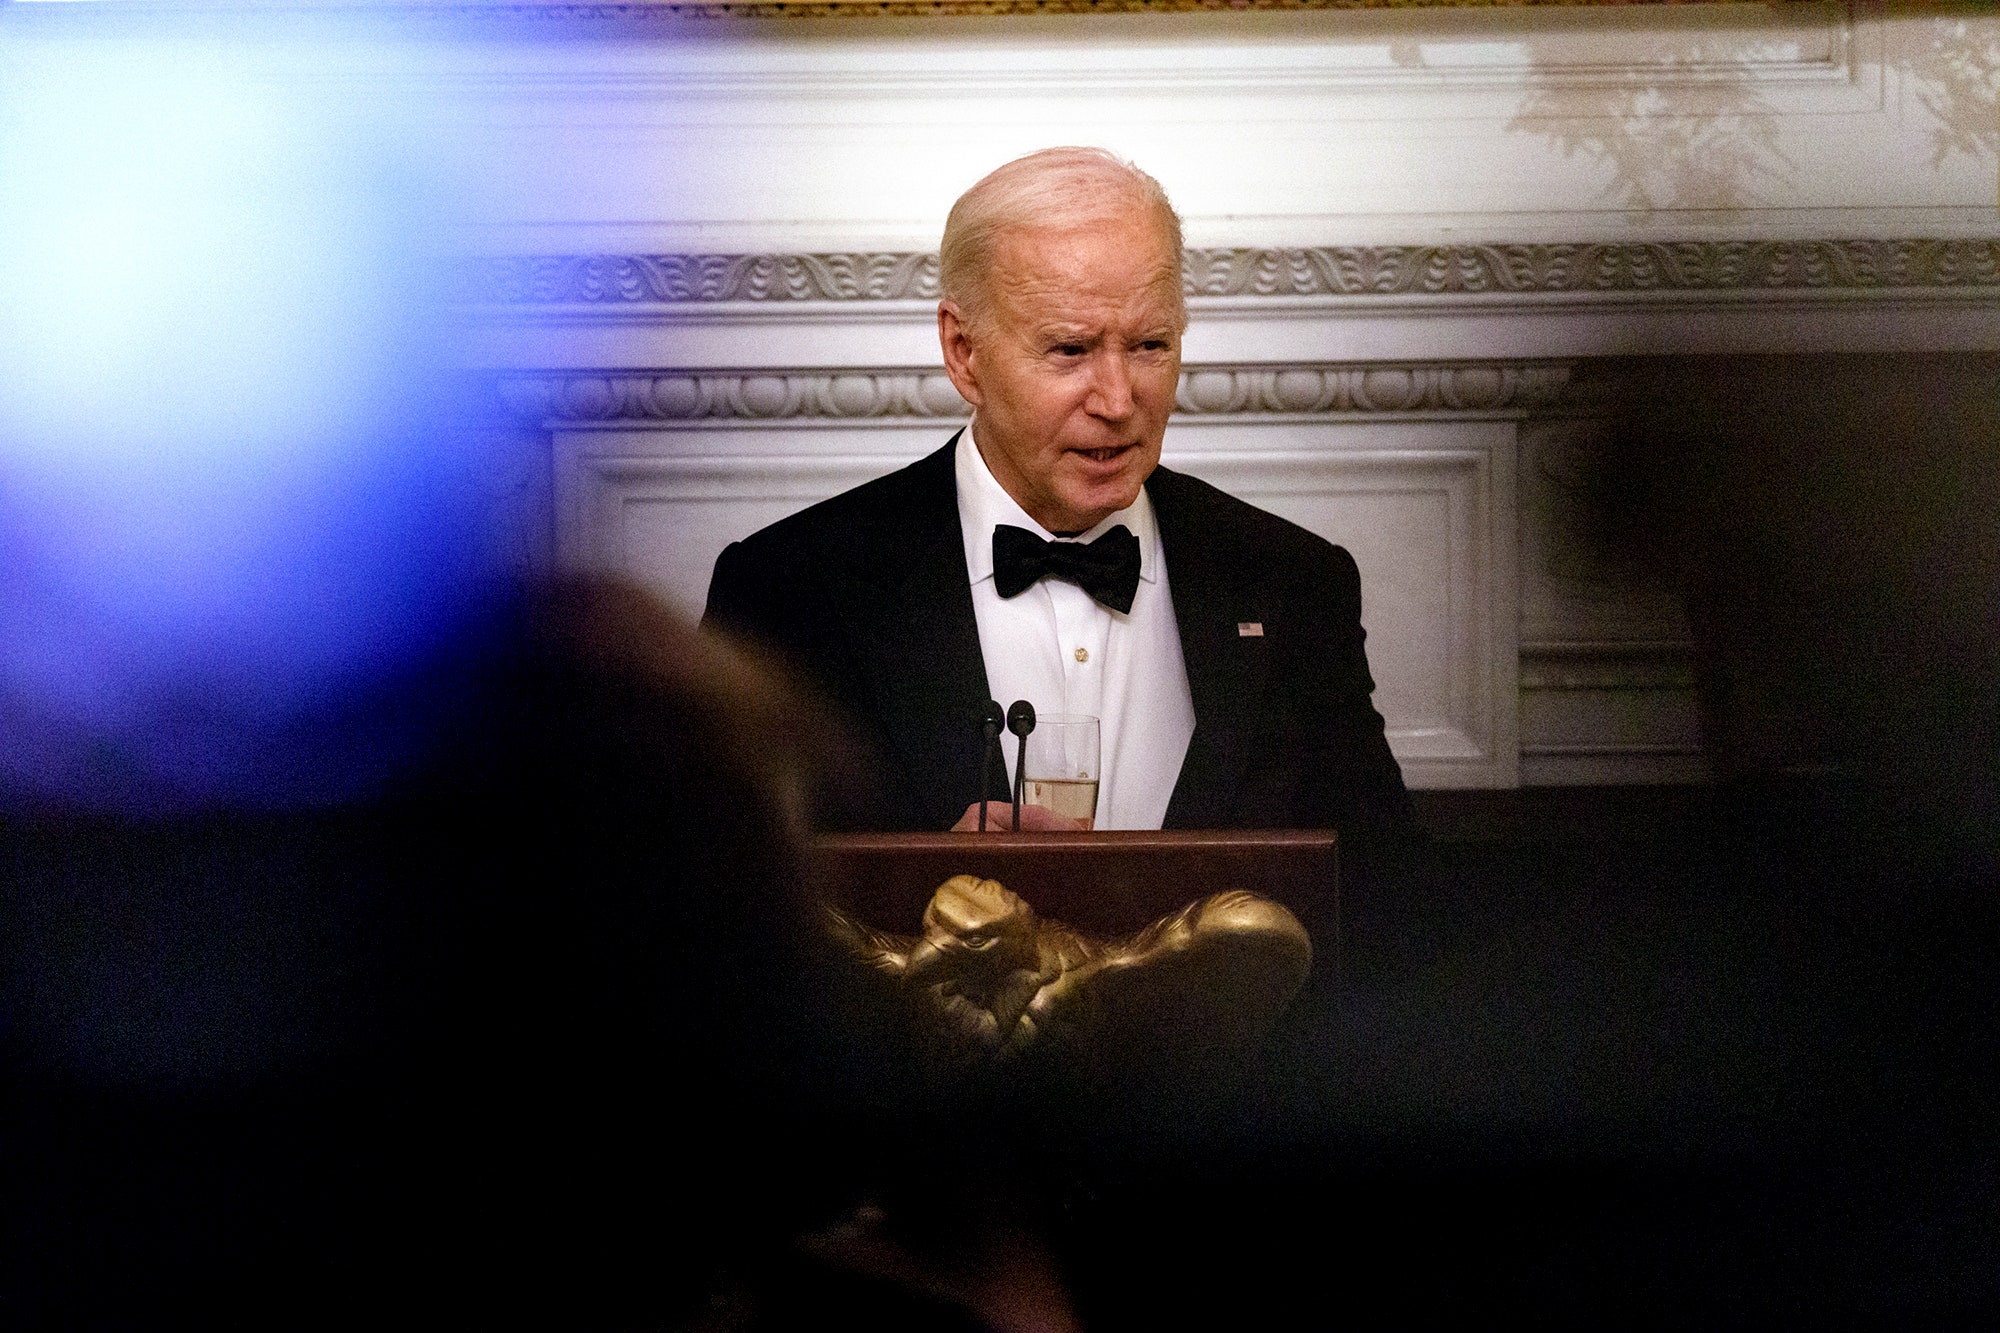 Image may contain Joe Biden People Person Accessories Formal Wear Tie Crowd Face Head Photography and Portrait